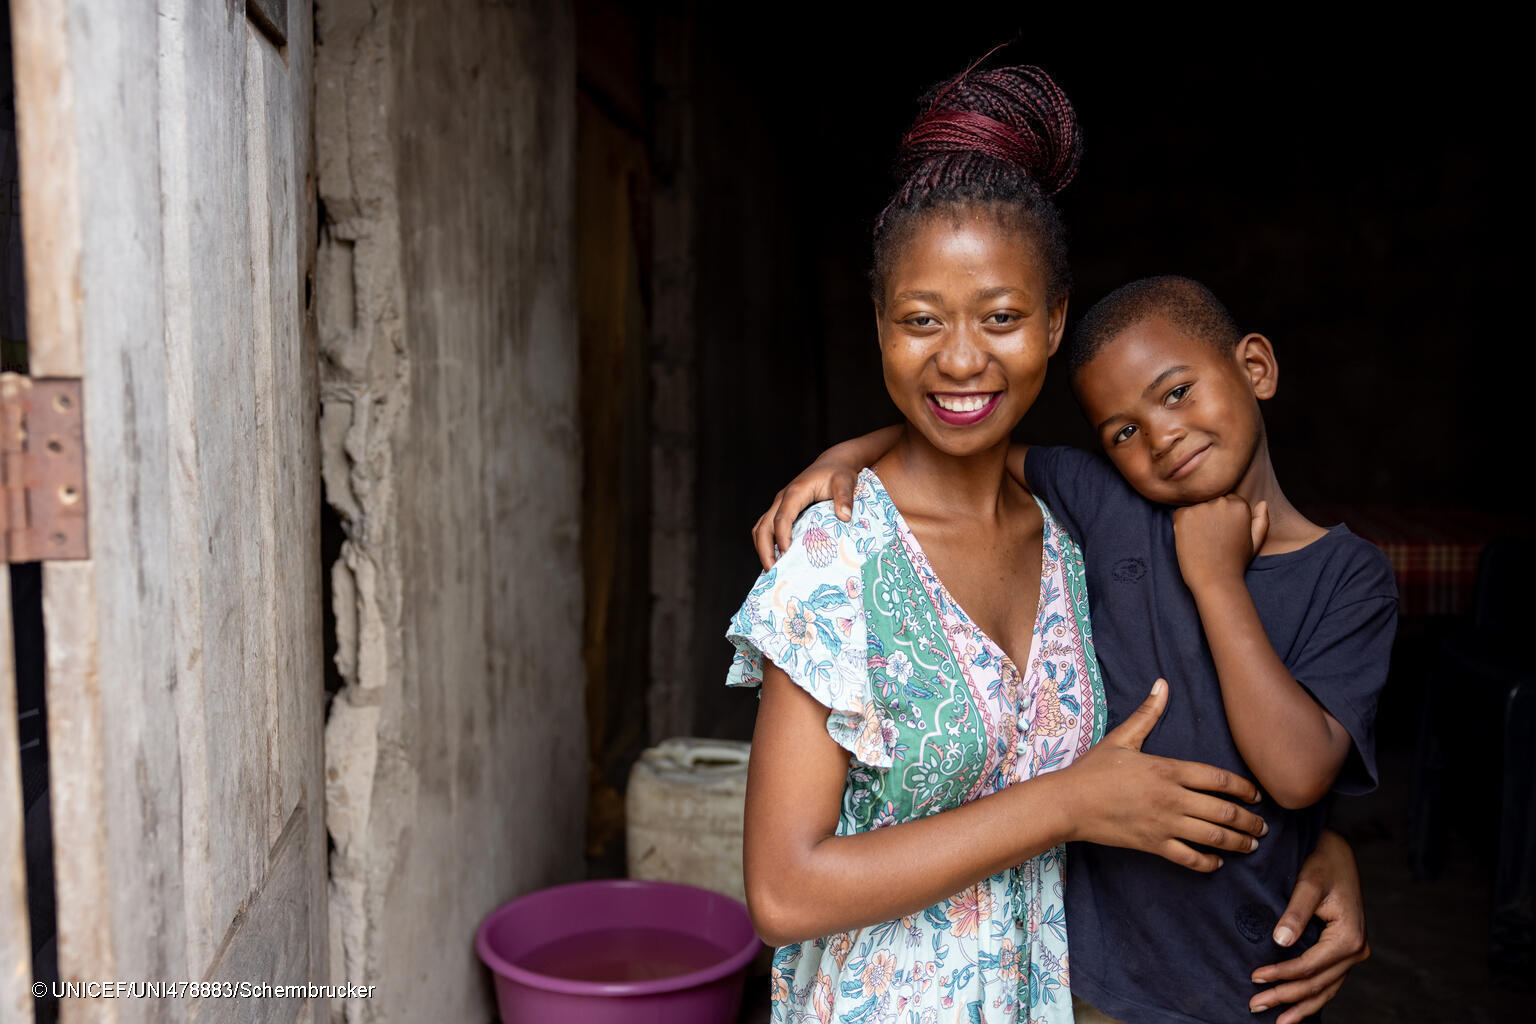 20-year-old Caterina with her 5-year-old son Wilter in Mozambique